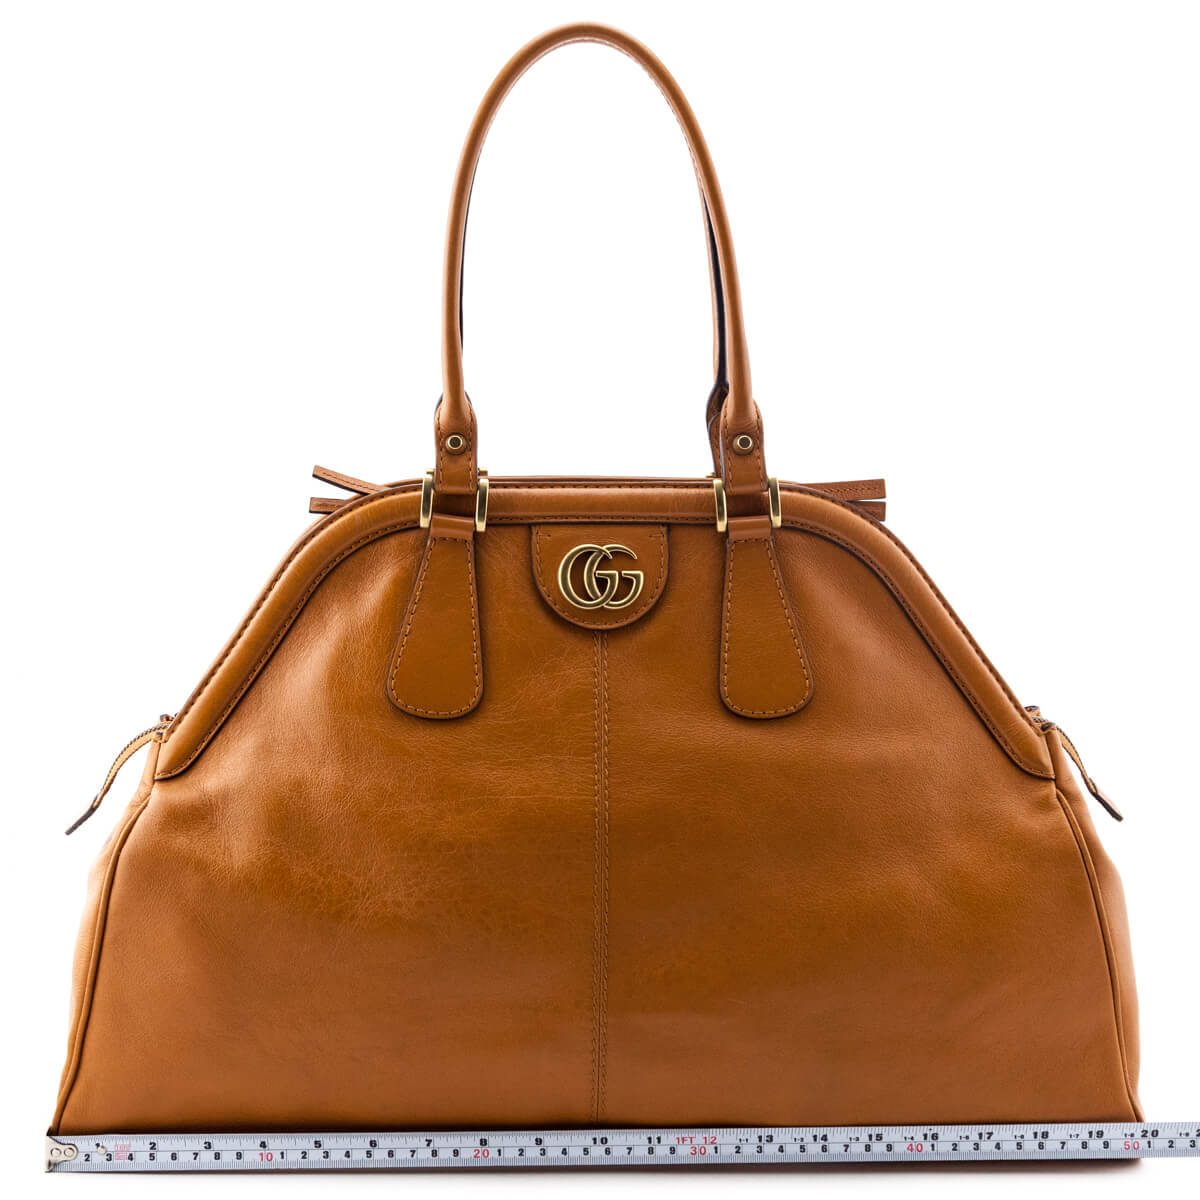 Gucci Tan Leather Large Re(Belle) Bag - Preloved Gucci Handbags Canada